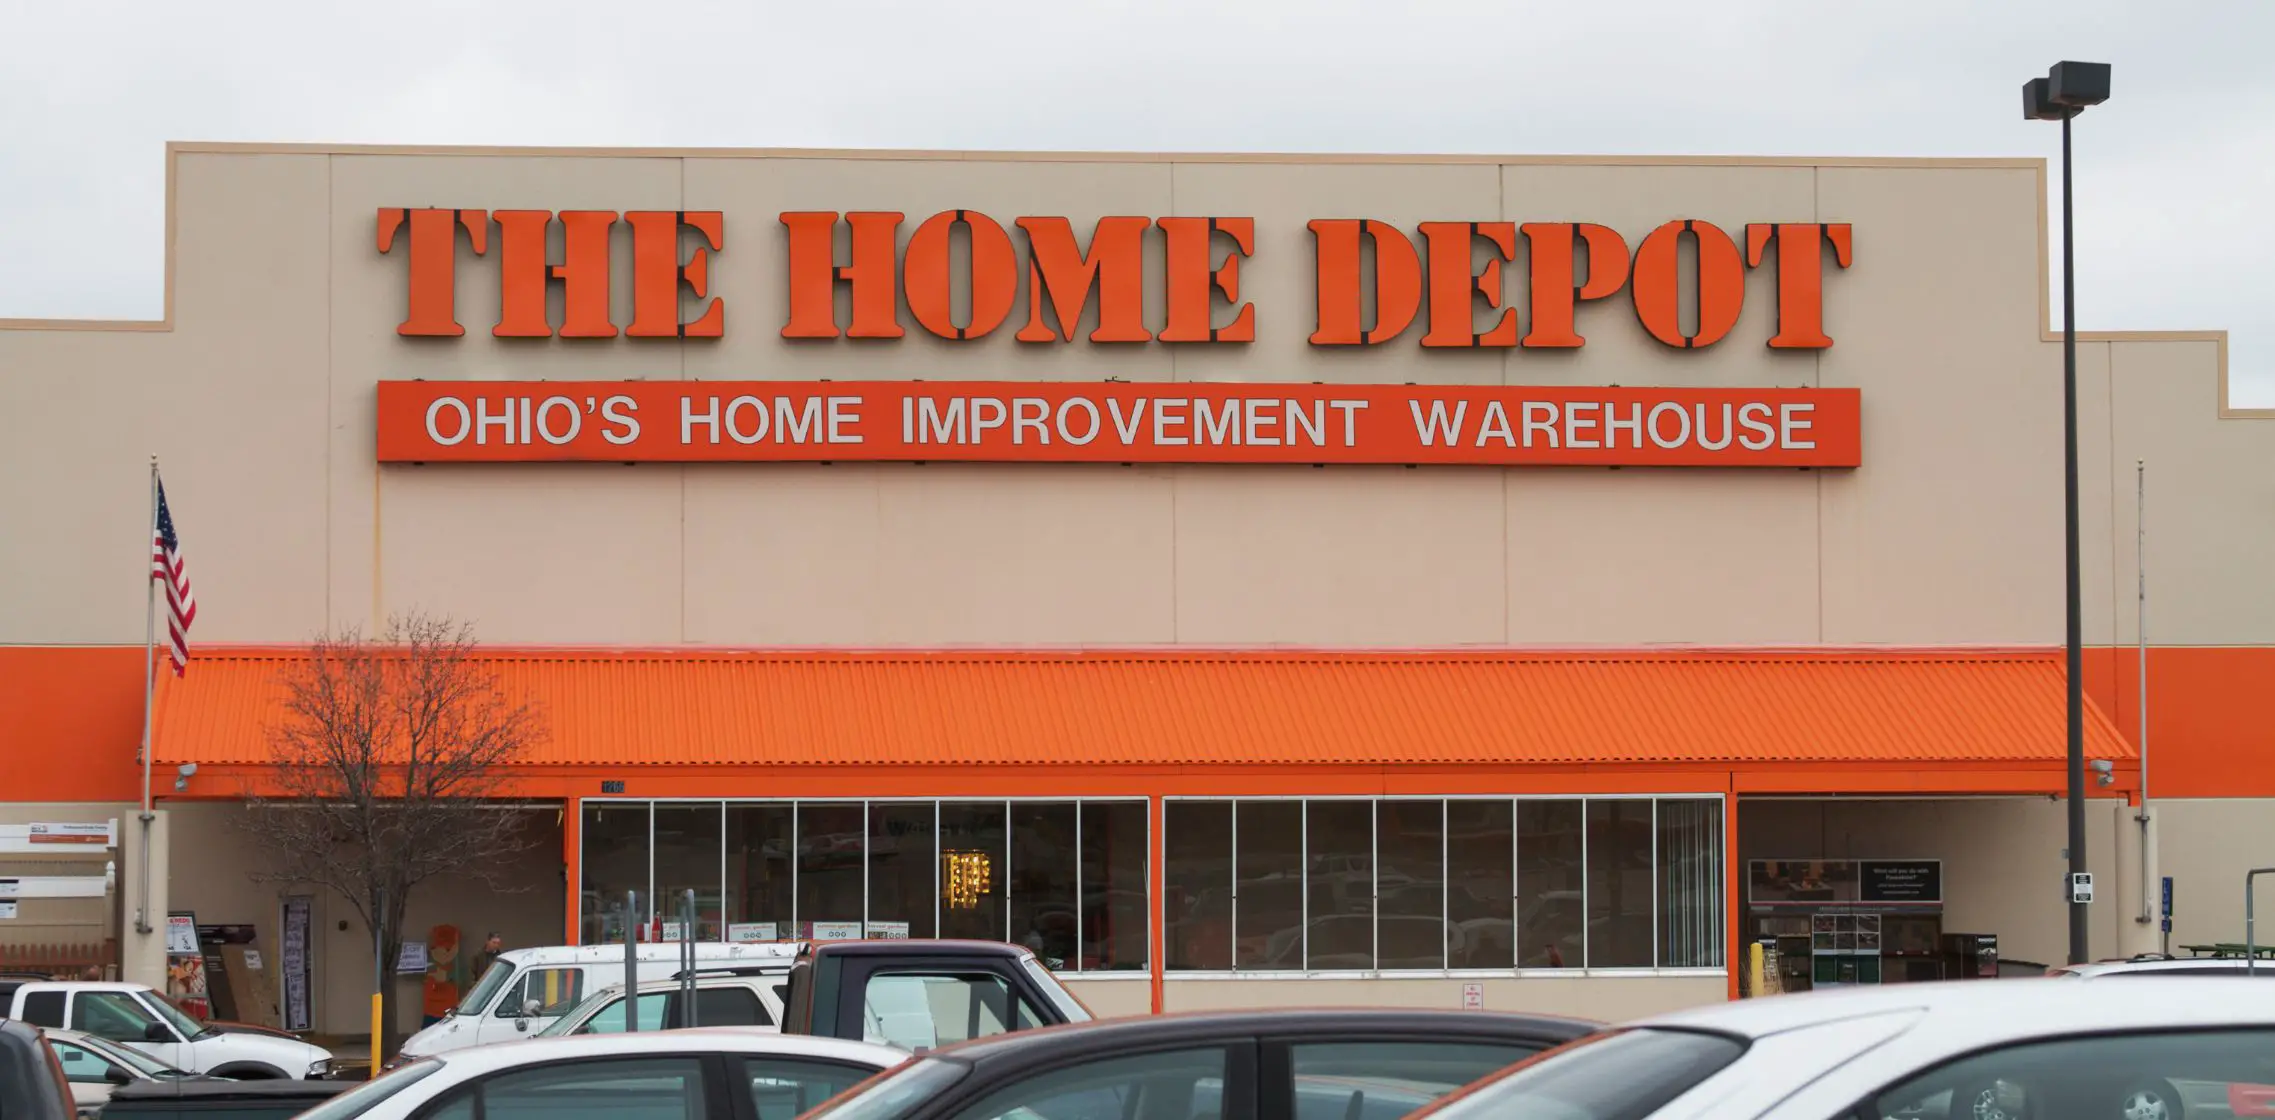 Can You Return Spray Paint To Home Depot